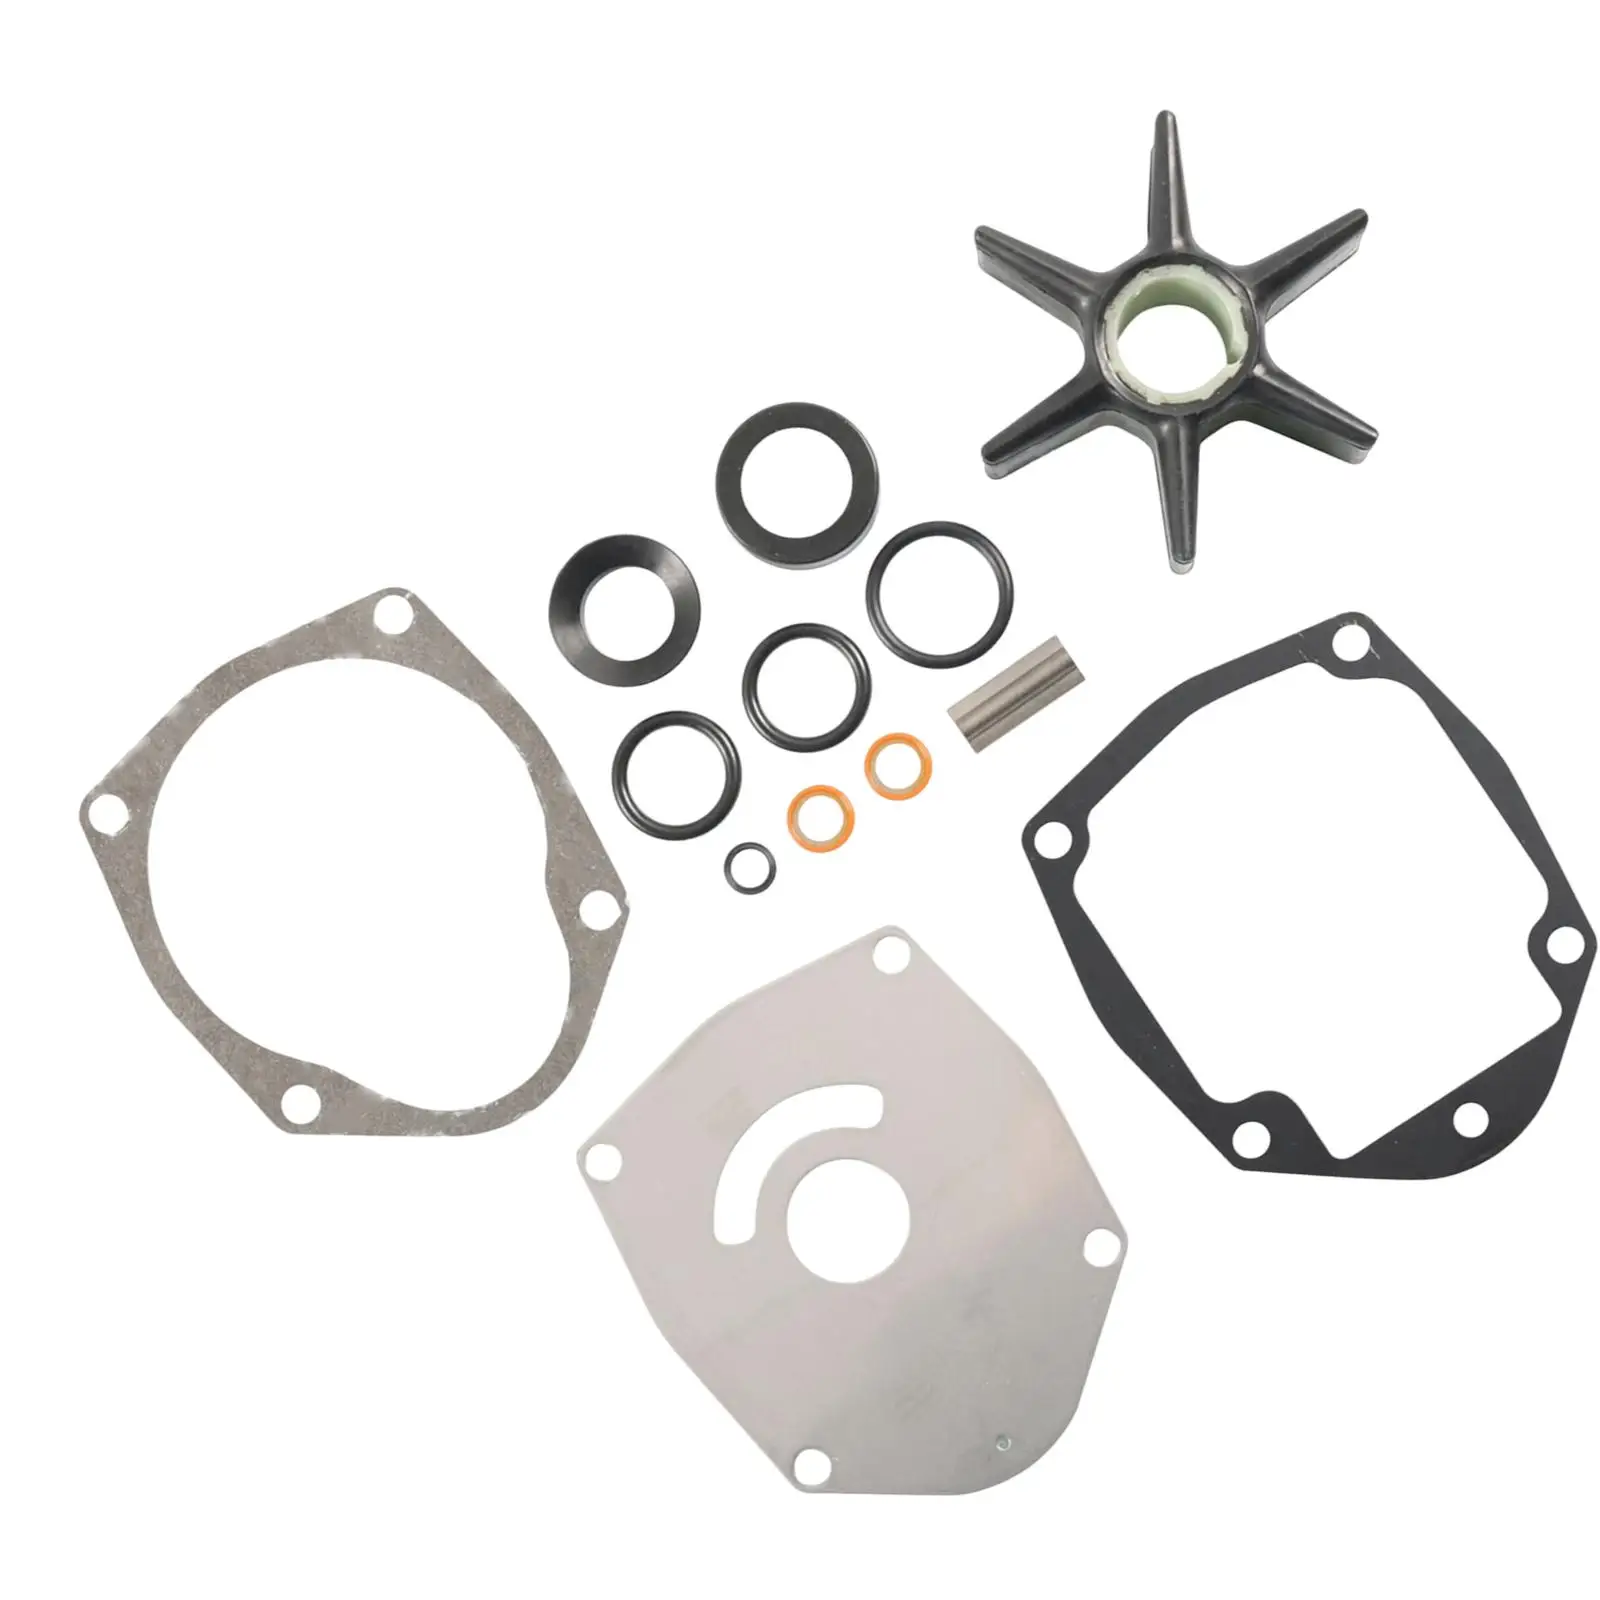 15Pcs Water Pump Impeller Kit 8M0100526 Fit for Mercury Marine Outboard Replacement